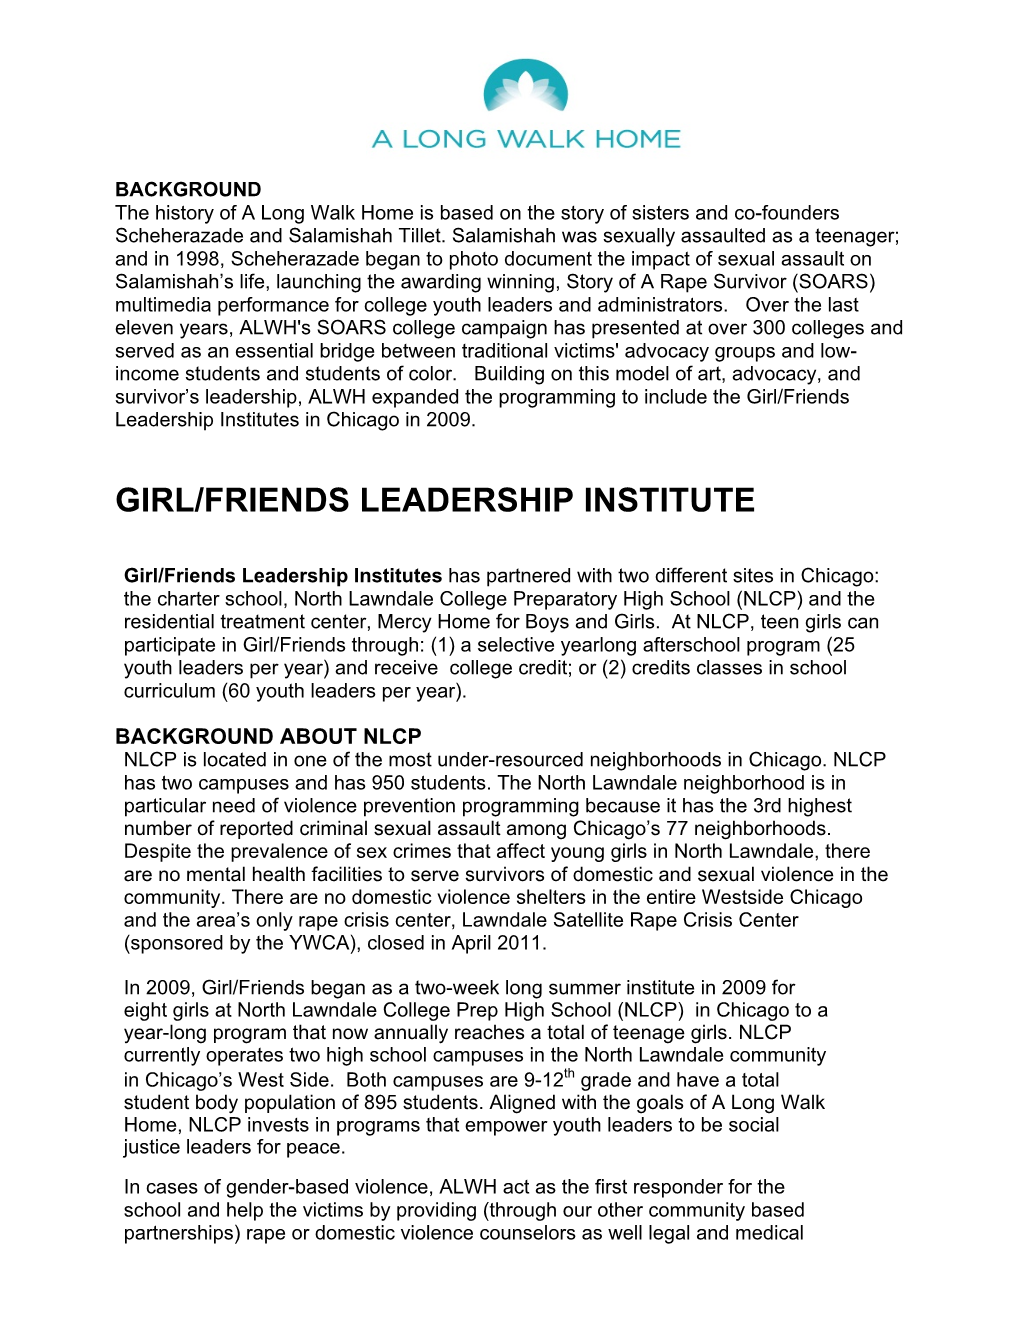 Girl/Friends Leadership Institutes in Chicago in 2009